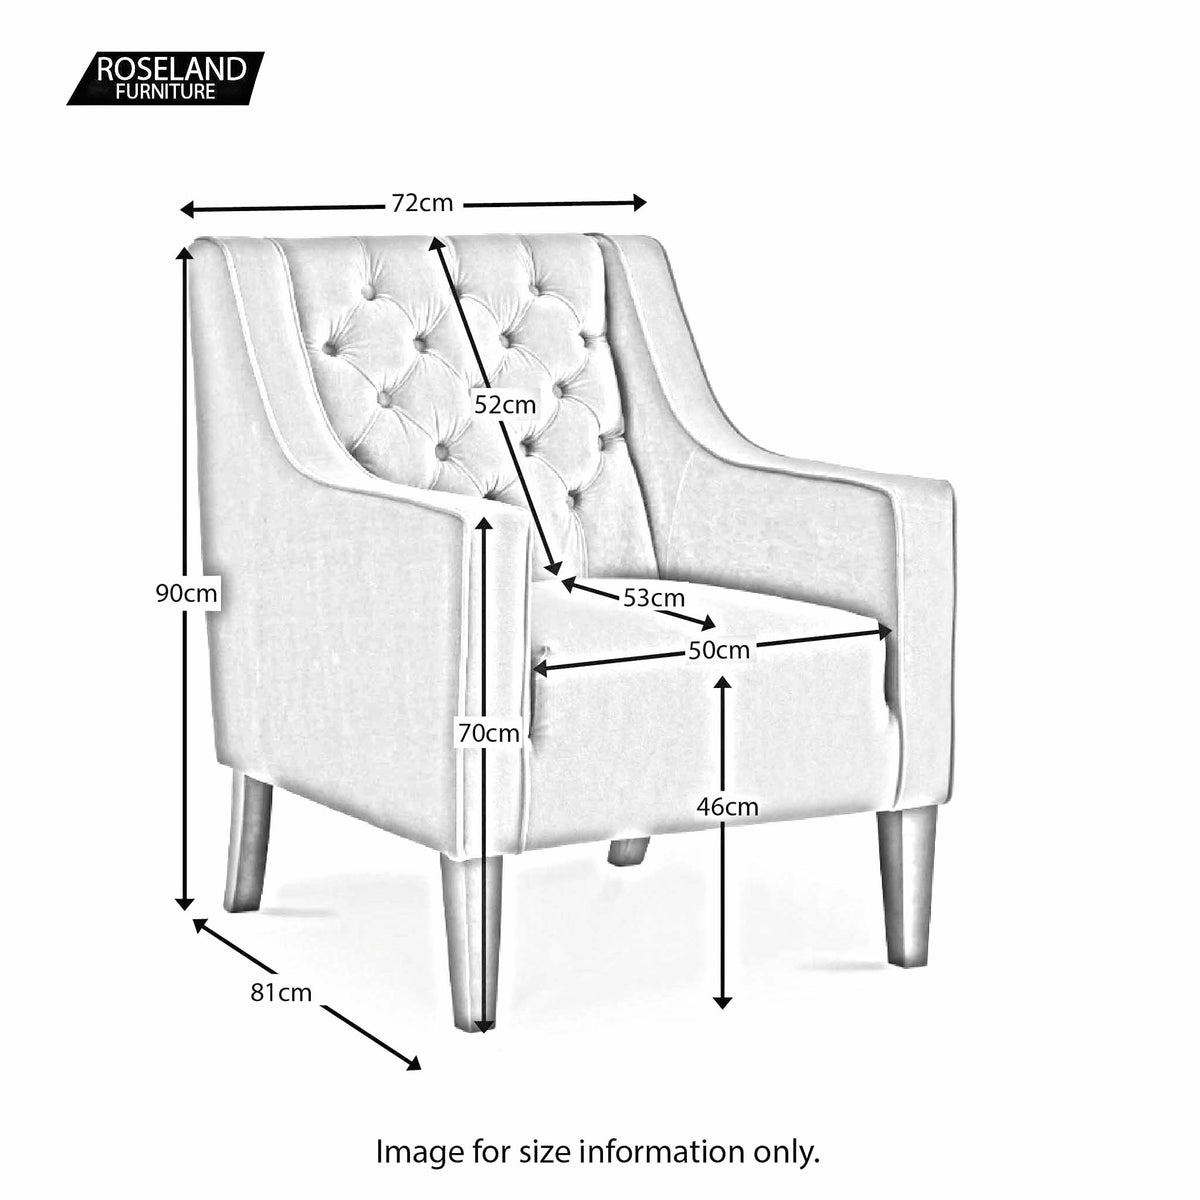 Eliza Grey Chesterfield Arm Chair - Size Guide